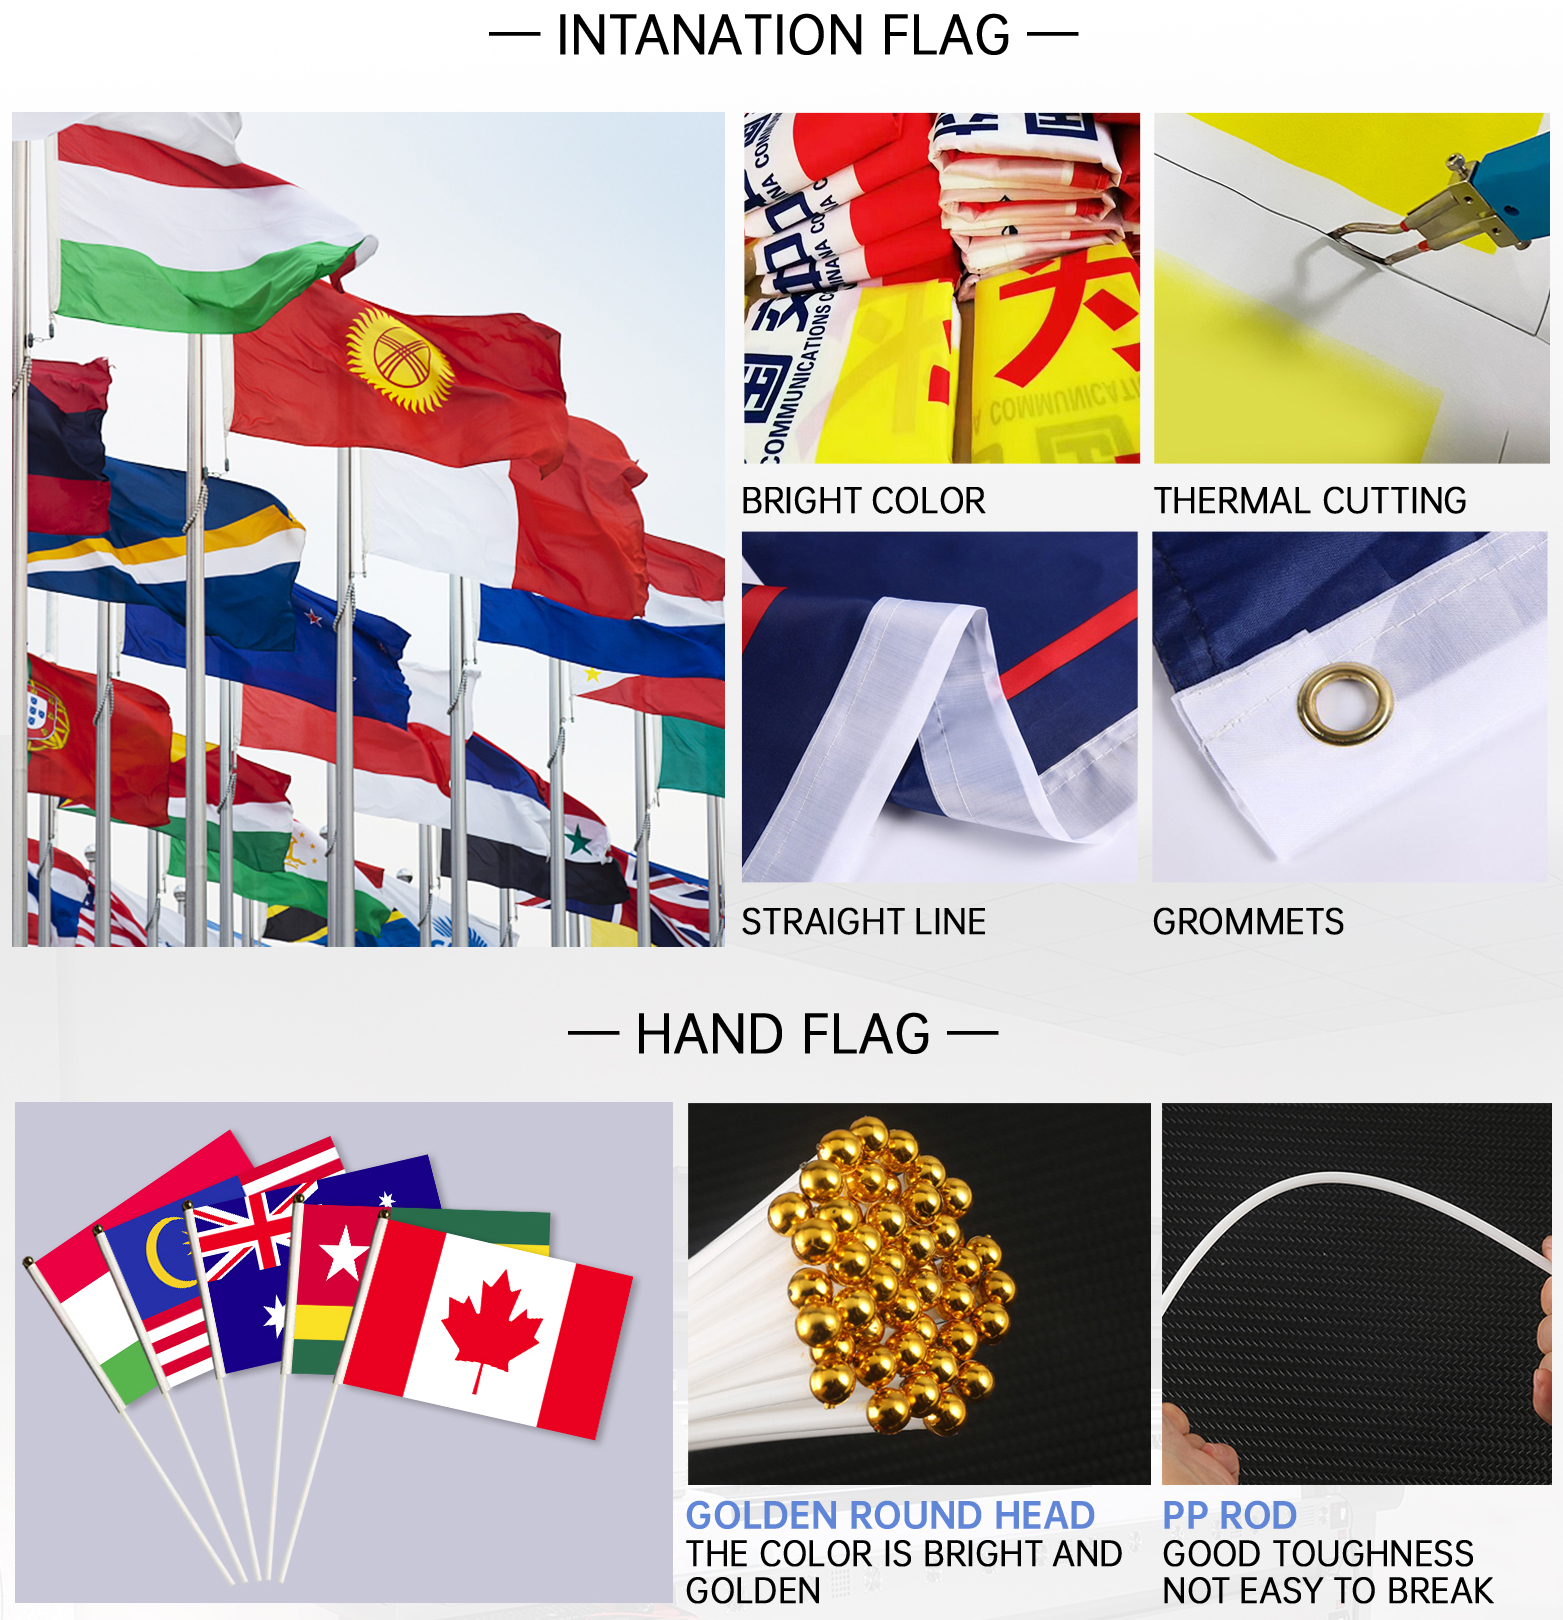 Custom Flags High Quality Factory 3x5ft Polyester Fabric Banner Flags 3x5 Customized Flags